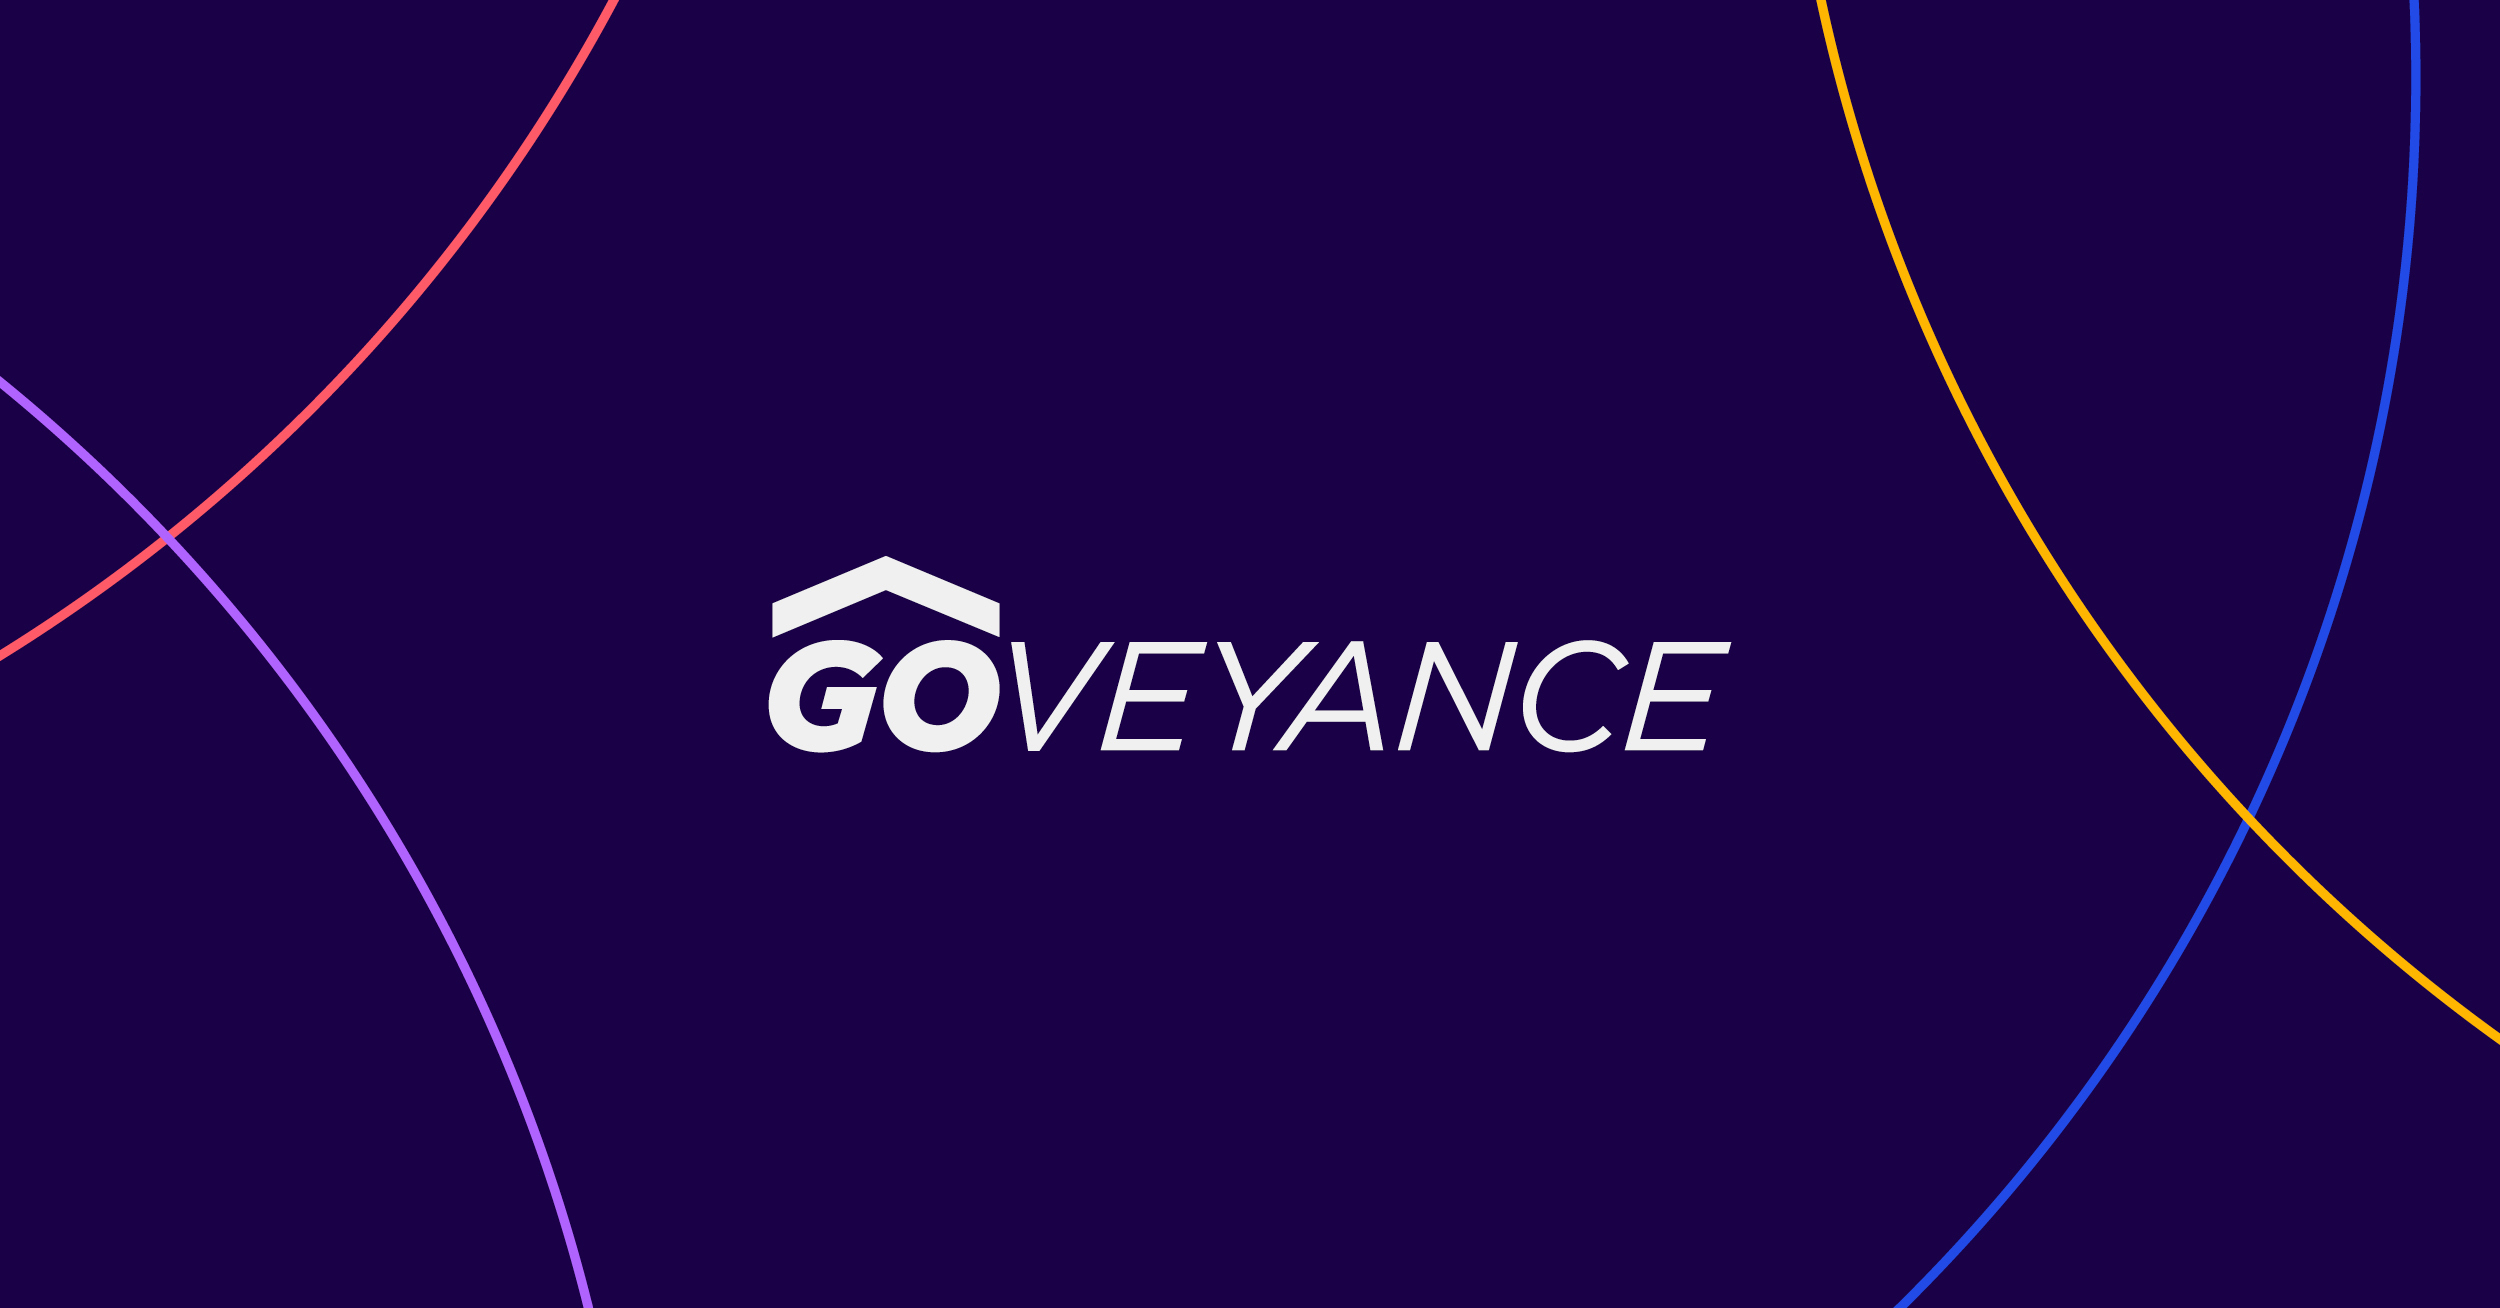 Why I joined Goveyance